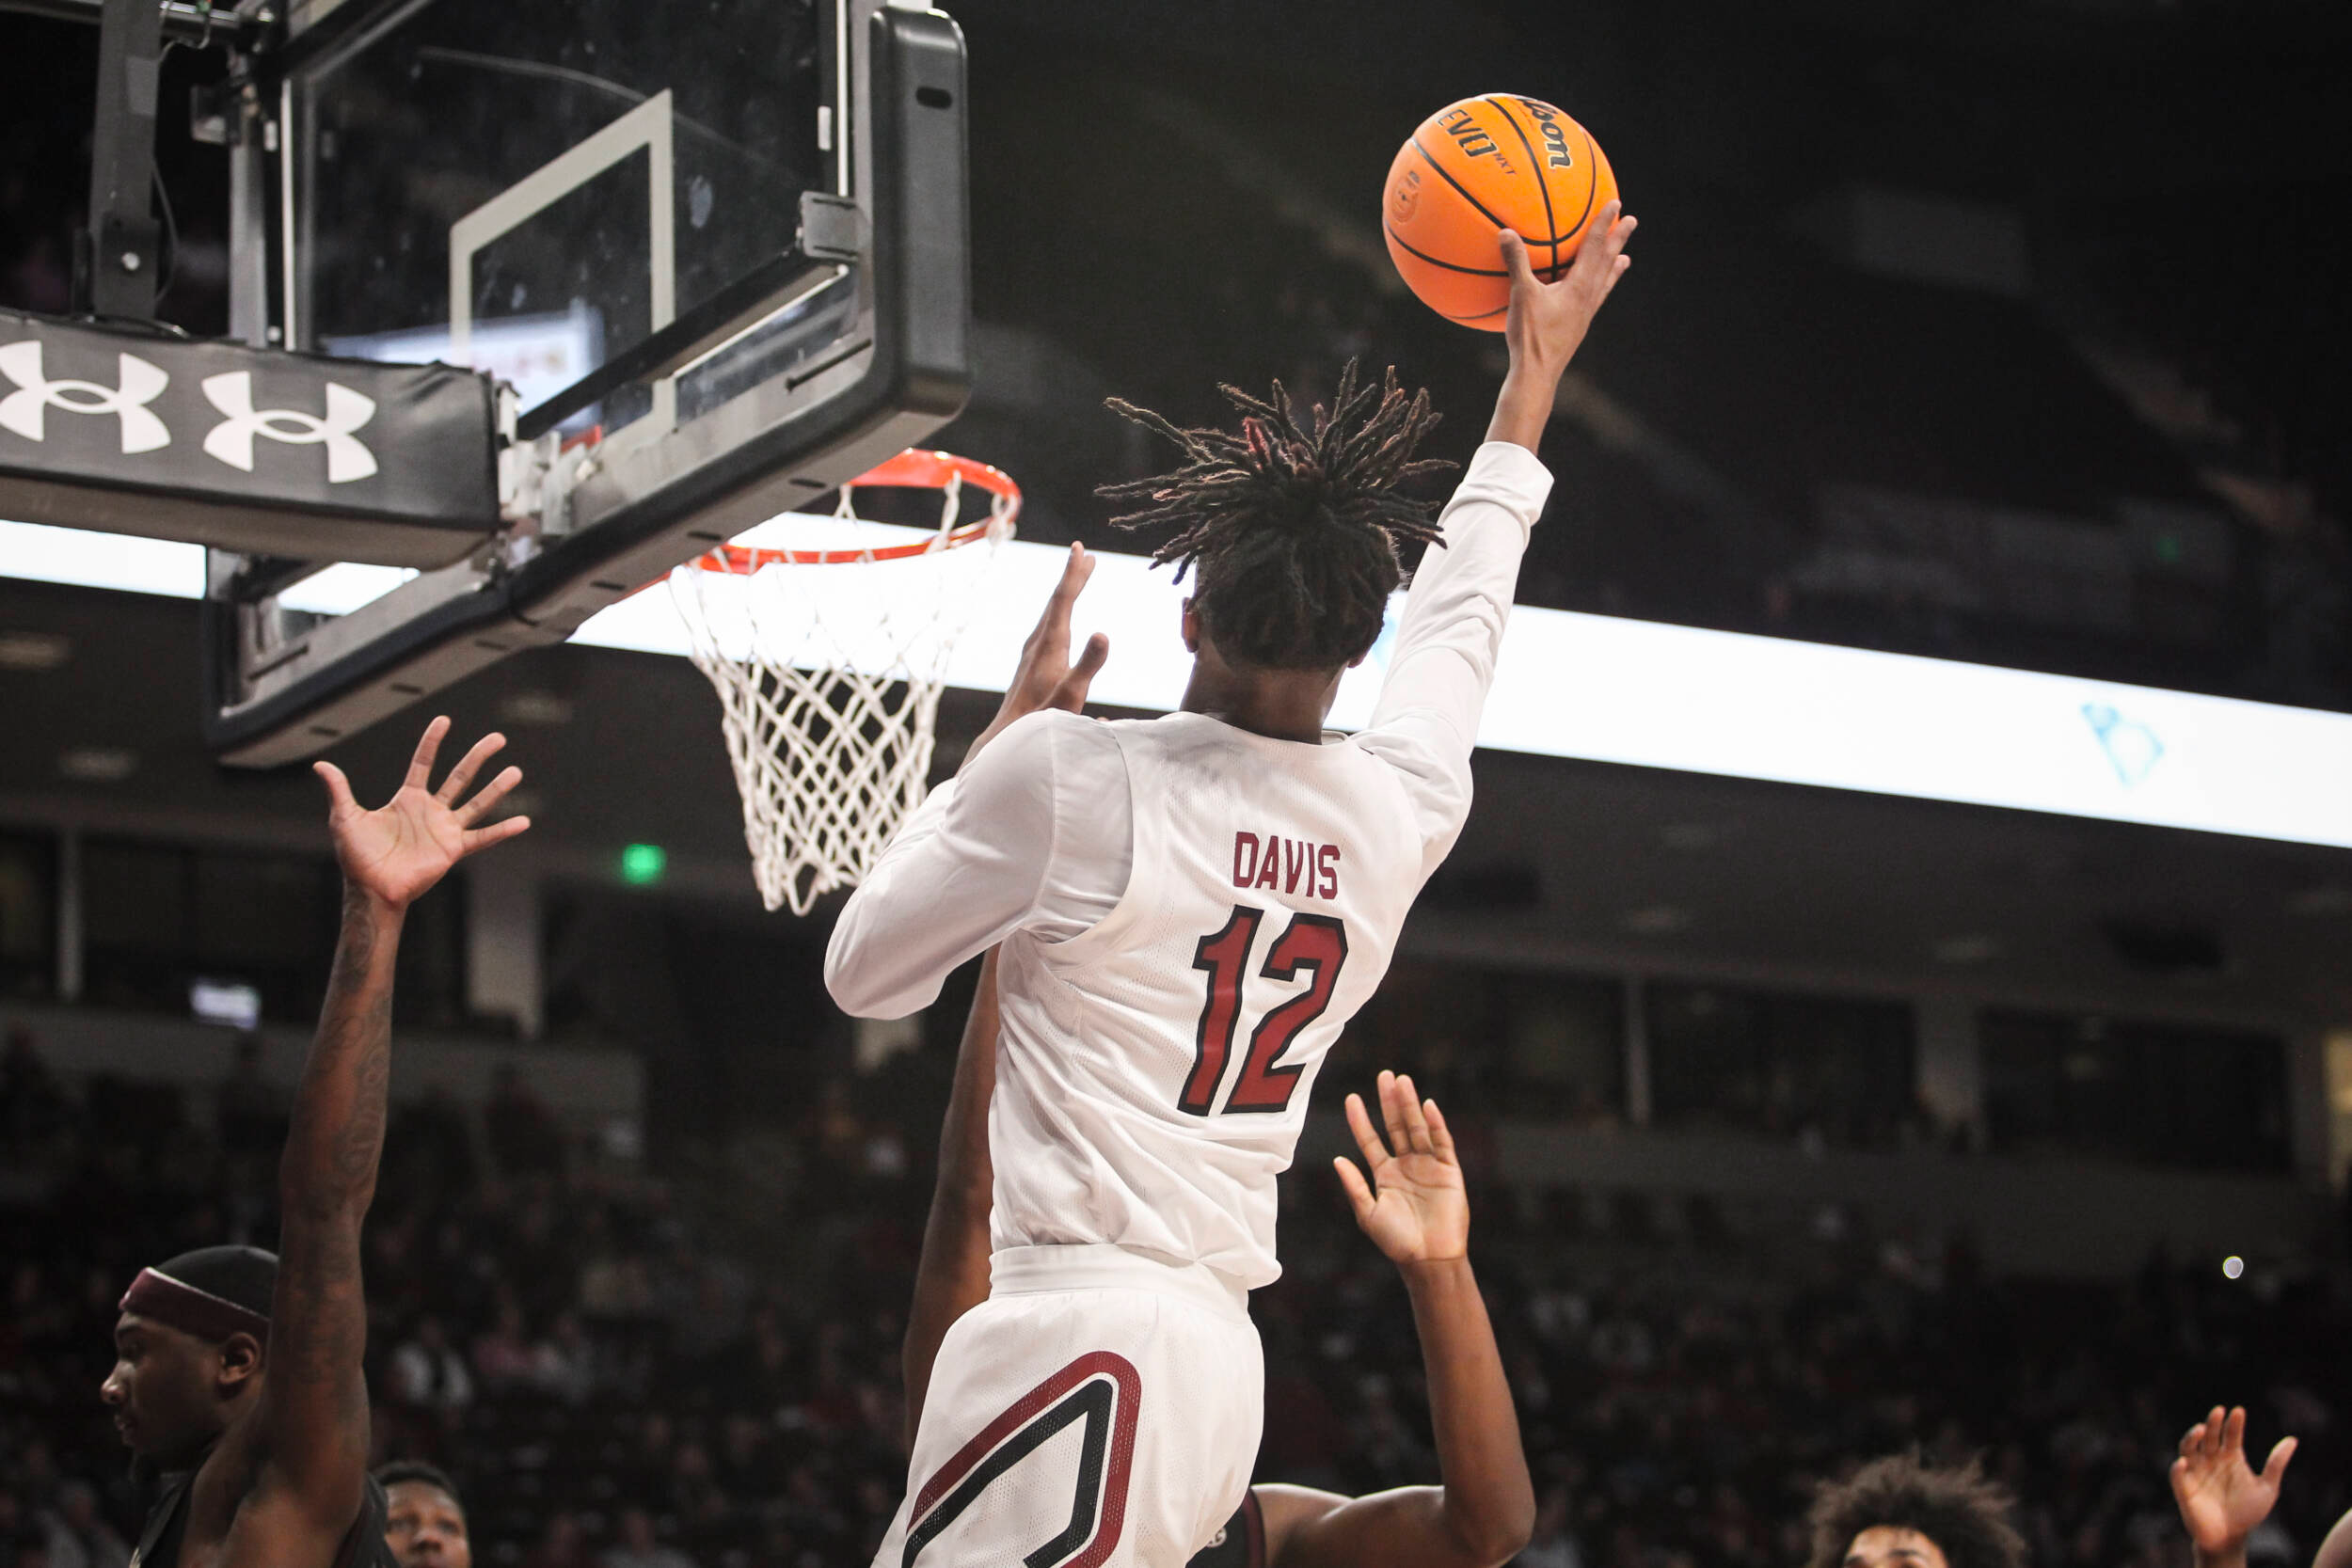 Gamecocks Take On Rebels Tuesday at CLA